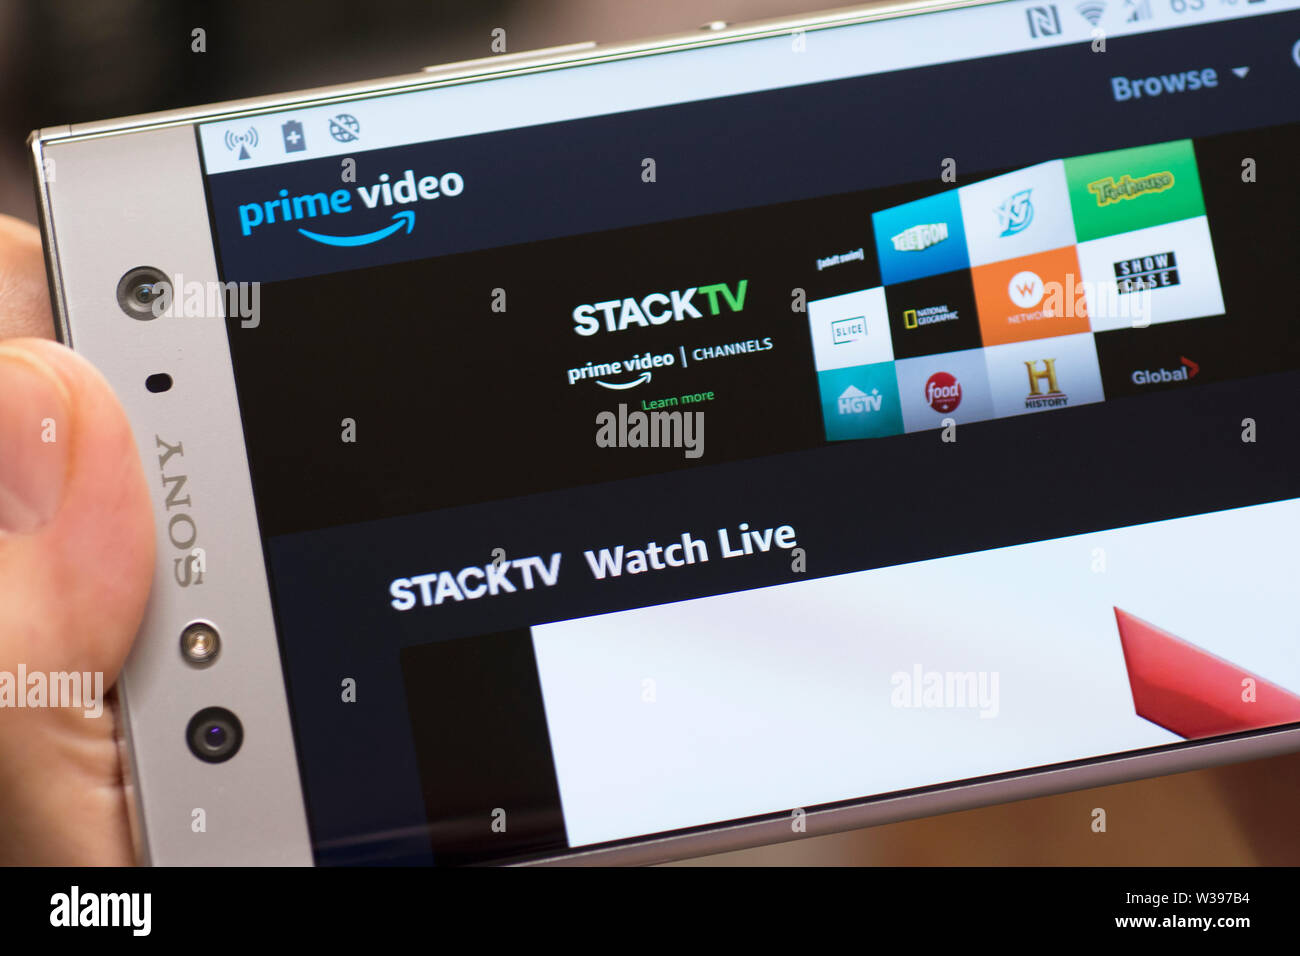 Amazon Prime Video, Stack TV, StackTV website screen, streaming TV channels on Android Mobile Phone Stock Photo